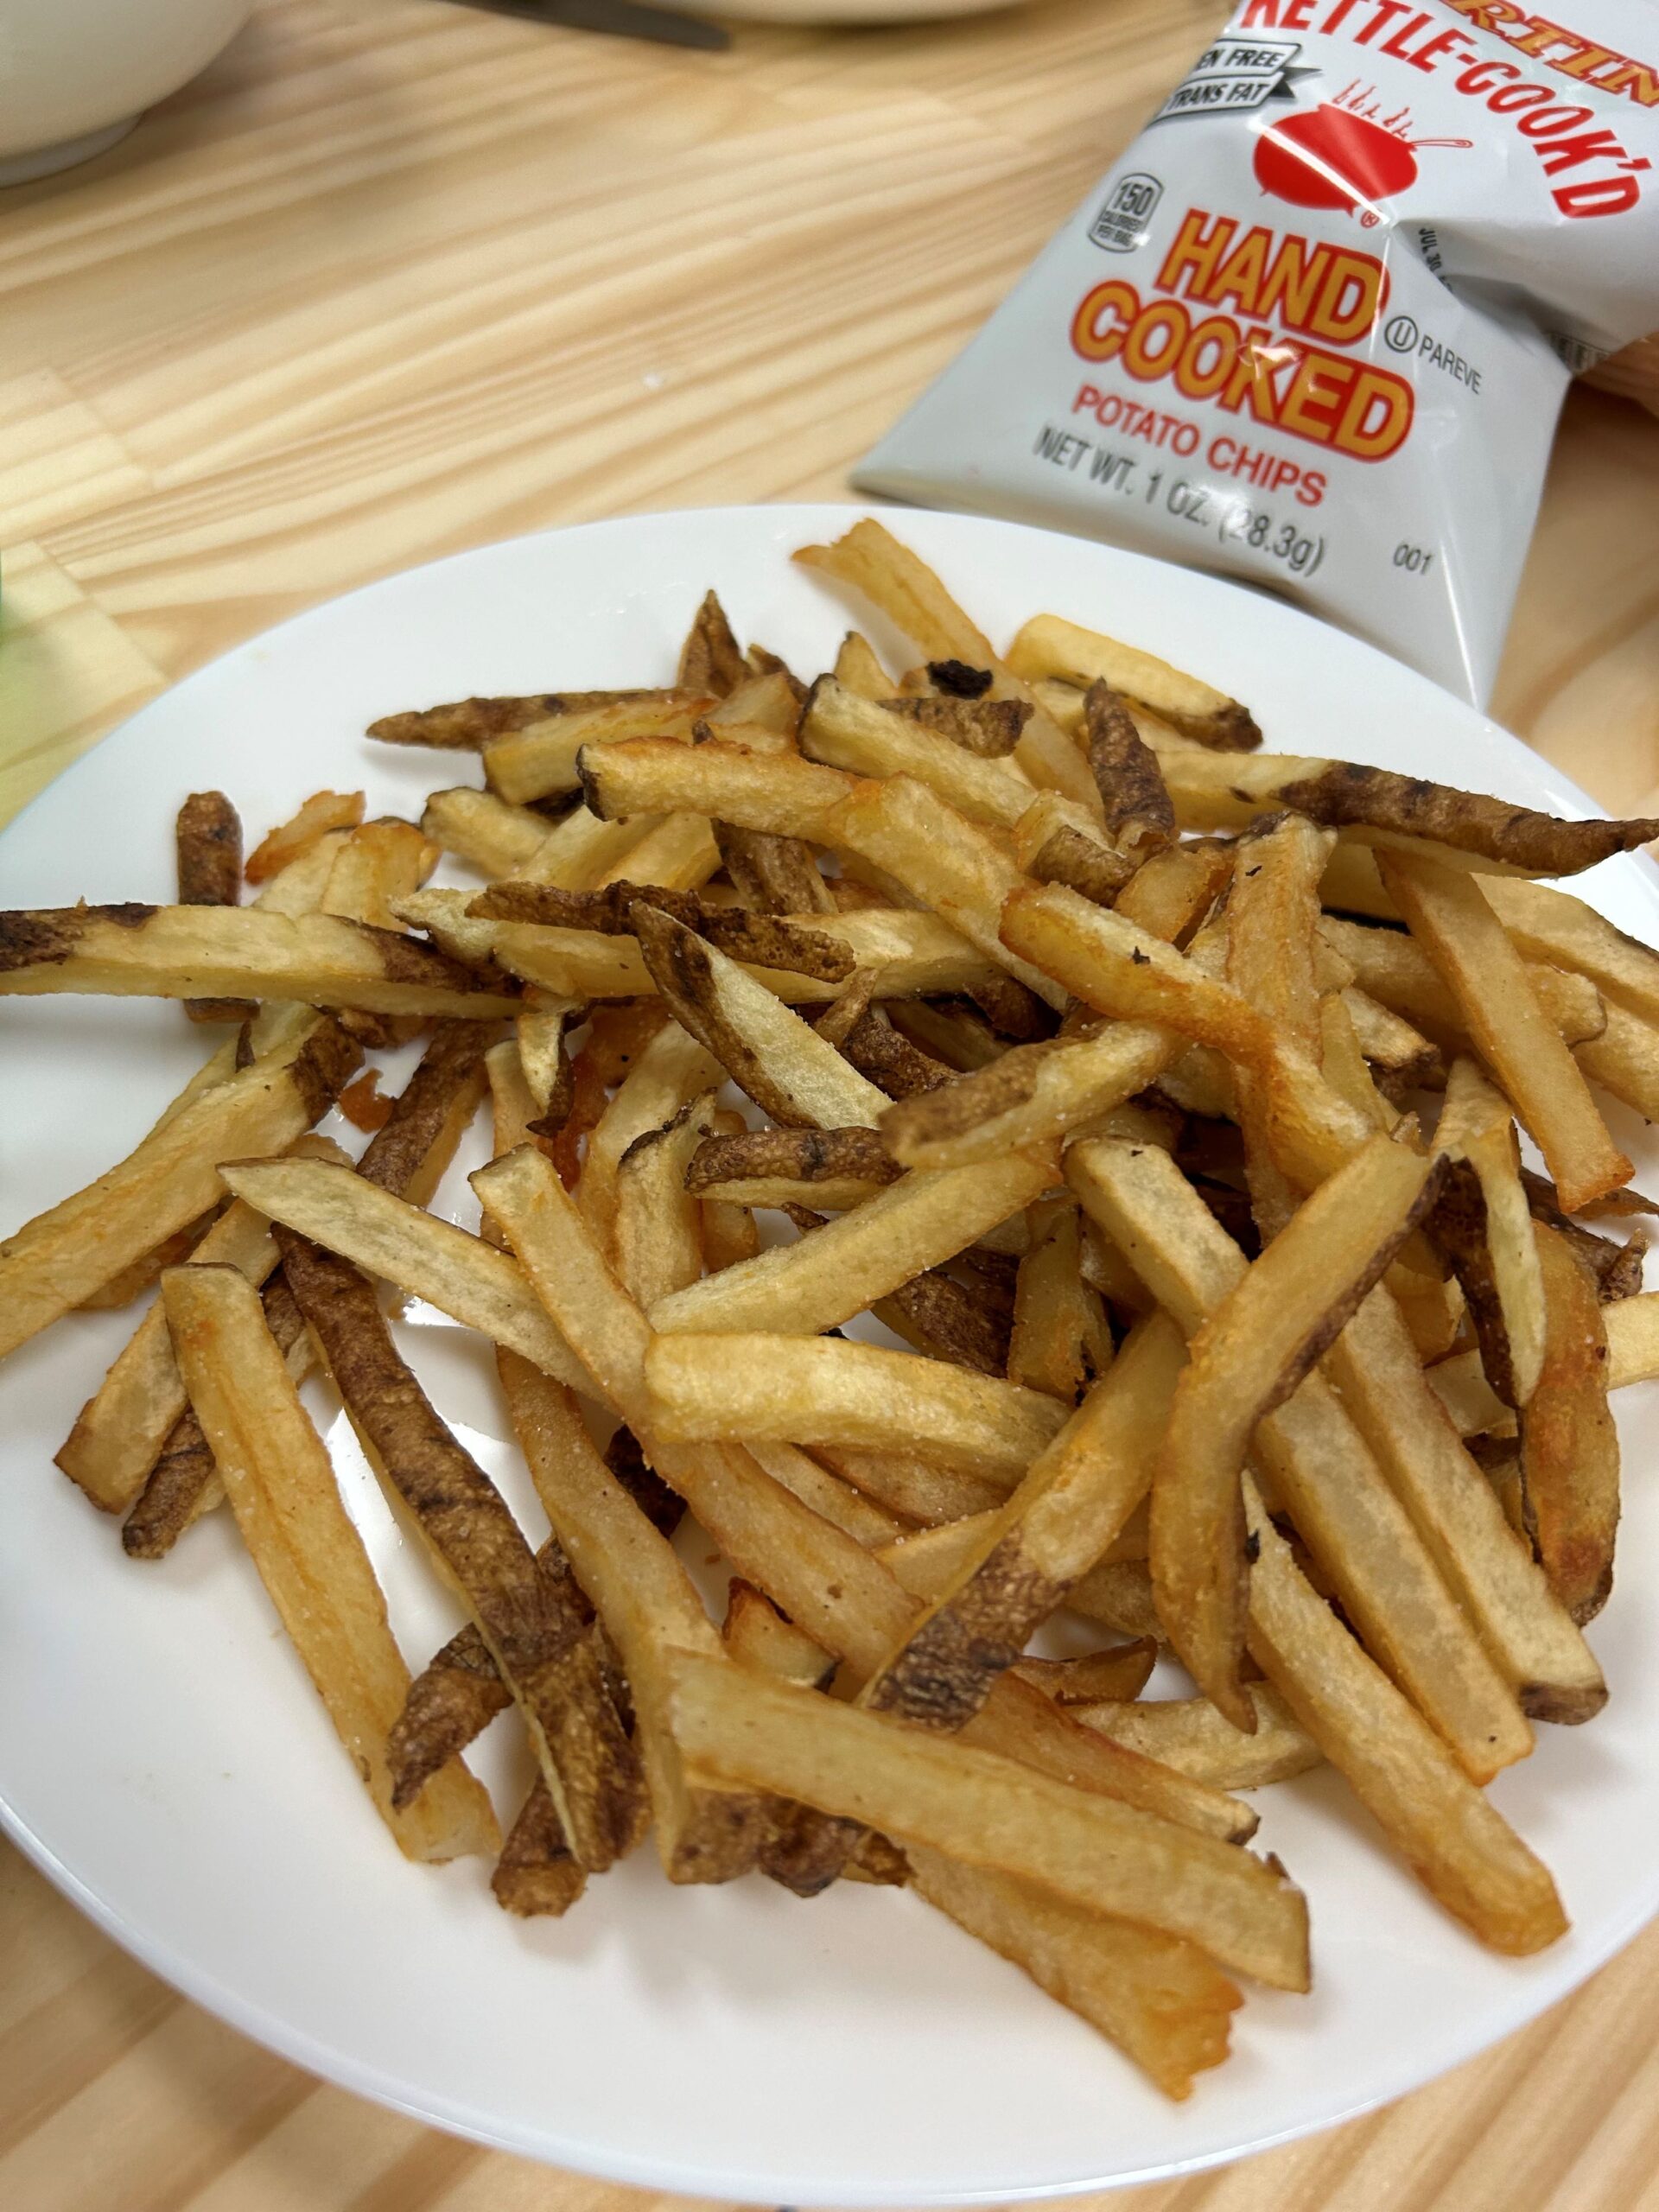 Kat's Fresh Cut Fries from real Idaho potatoes served on a white plate having a bag of potato chips placed next to it on an ash wood table.